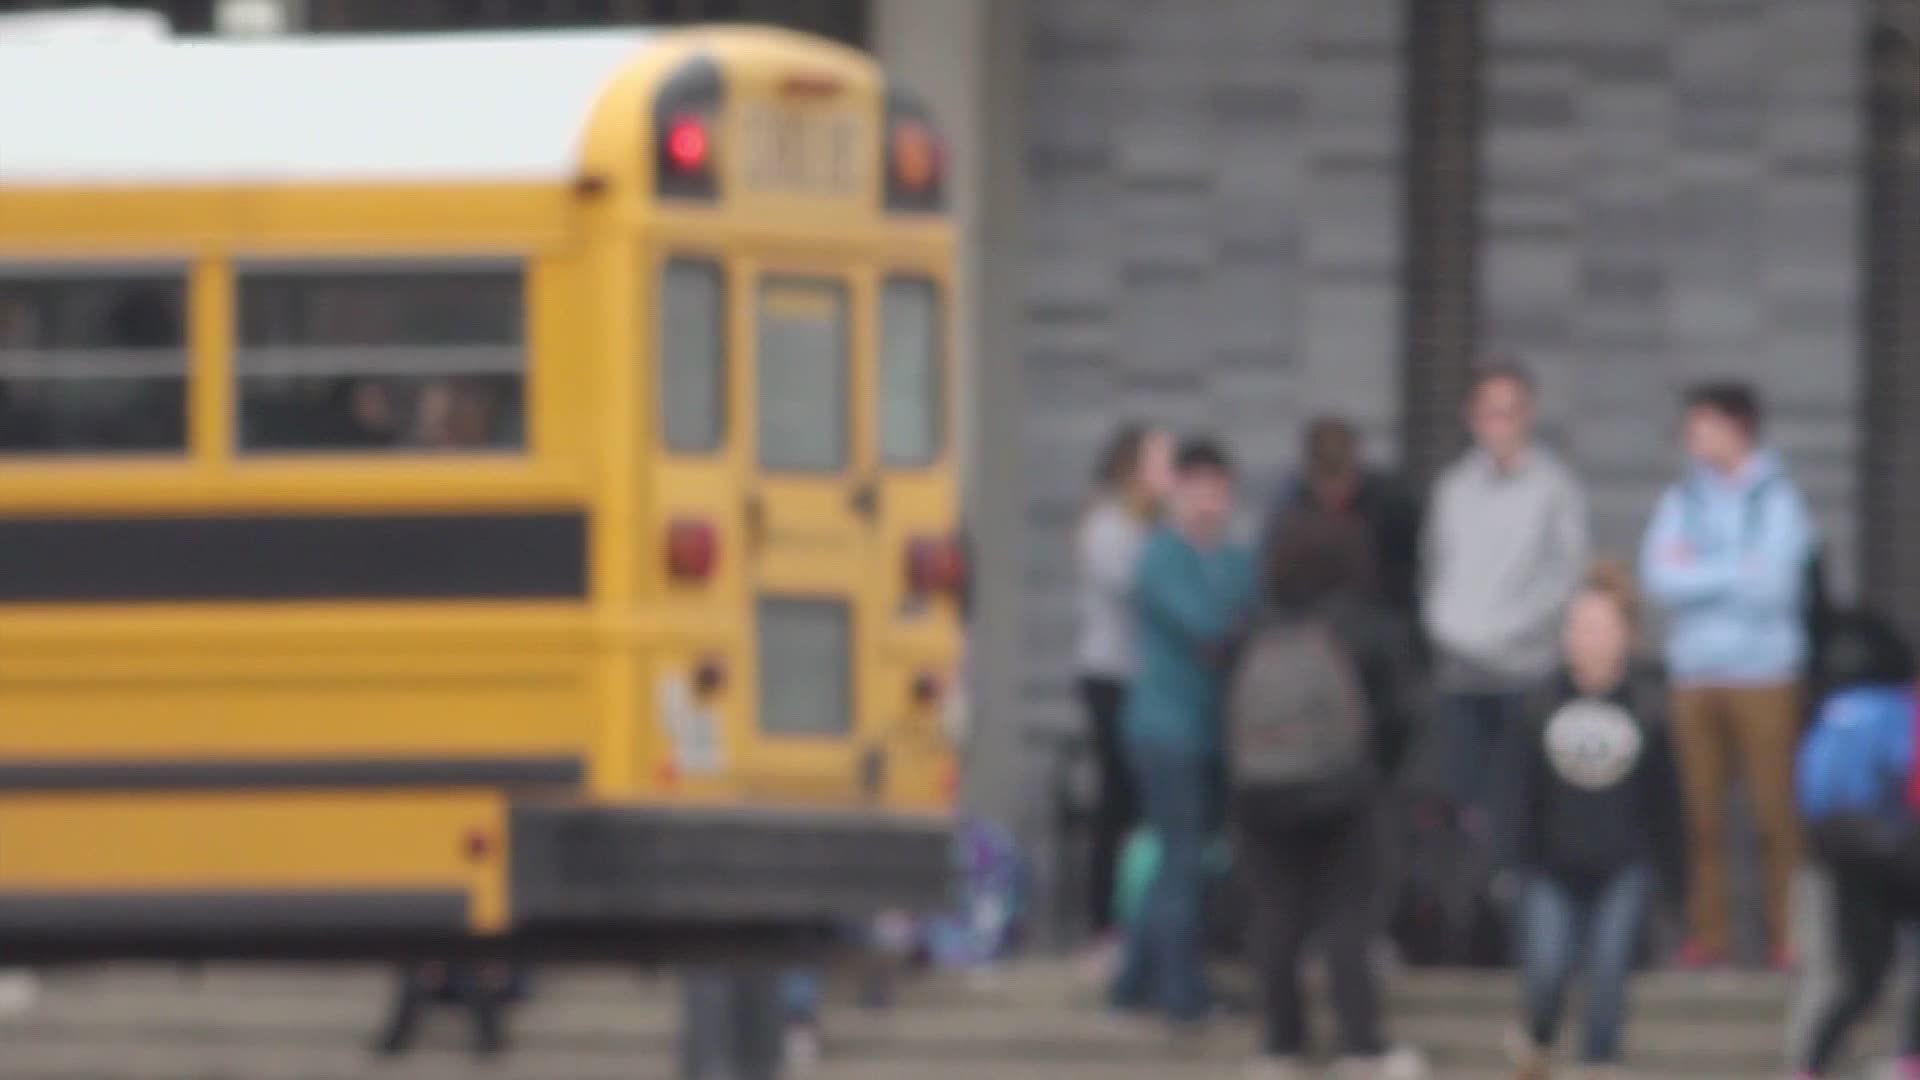 Due to concerns about the virus, JCPS teachers overwhelmingly don't want to start school in person in the fall, according to a survey from the  teachers union.